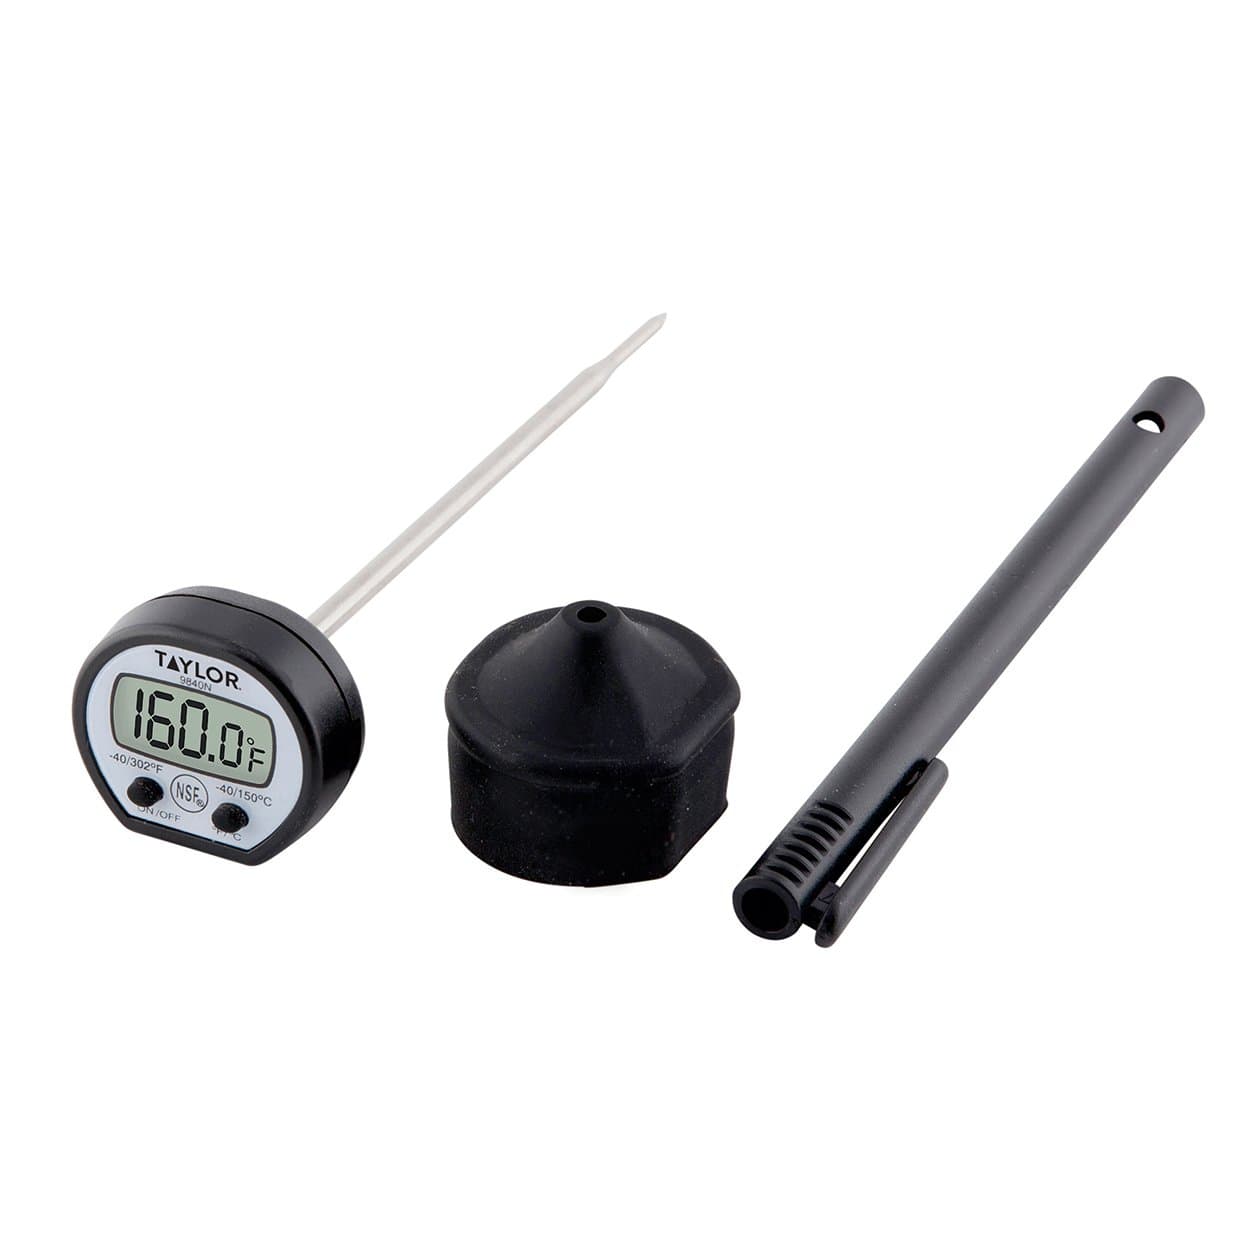 Taylor 9840RB 4 5/8″ Digital Pocket Probe Thermometer with Rubber Boot